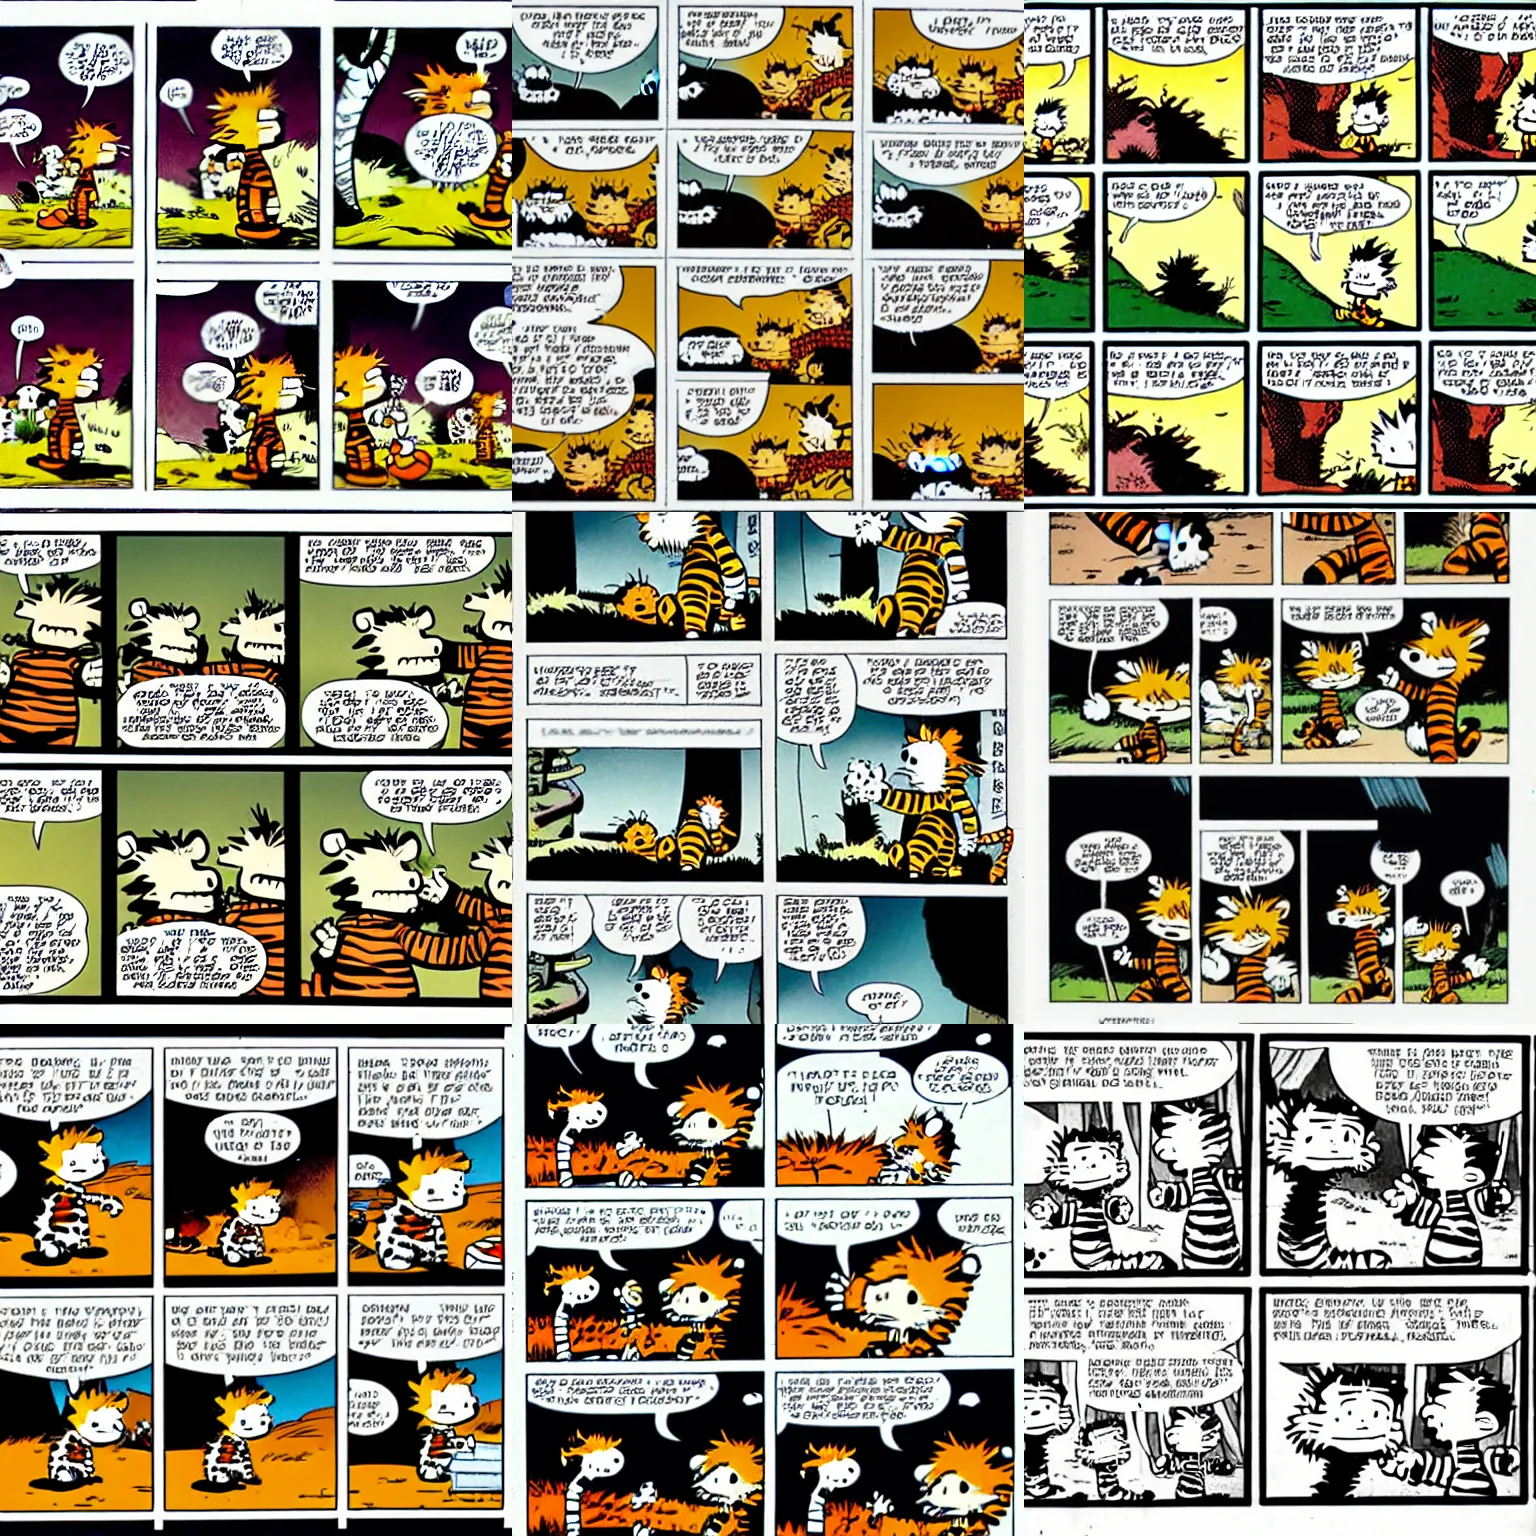 comic book strip of calvin and hobbes by bill watterson | Stable ...